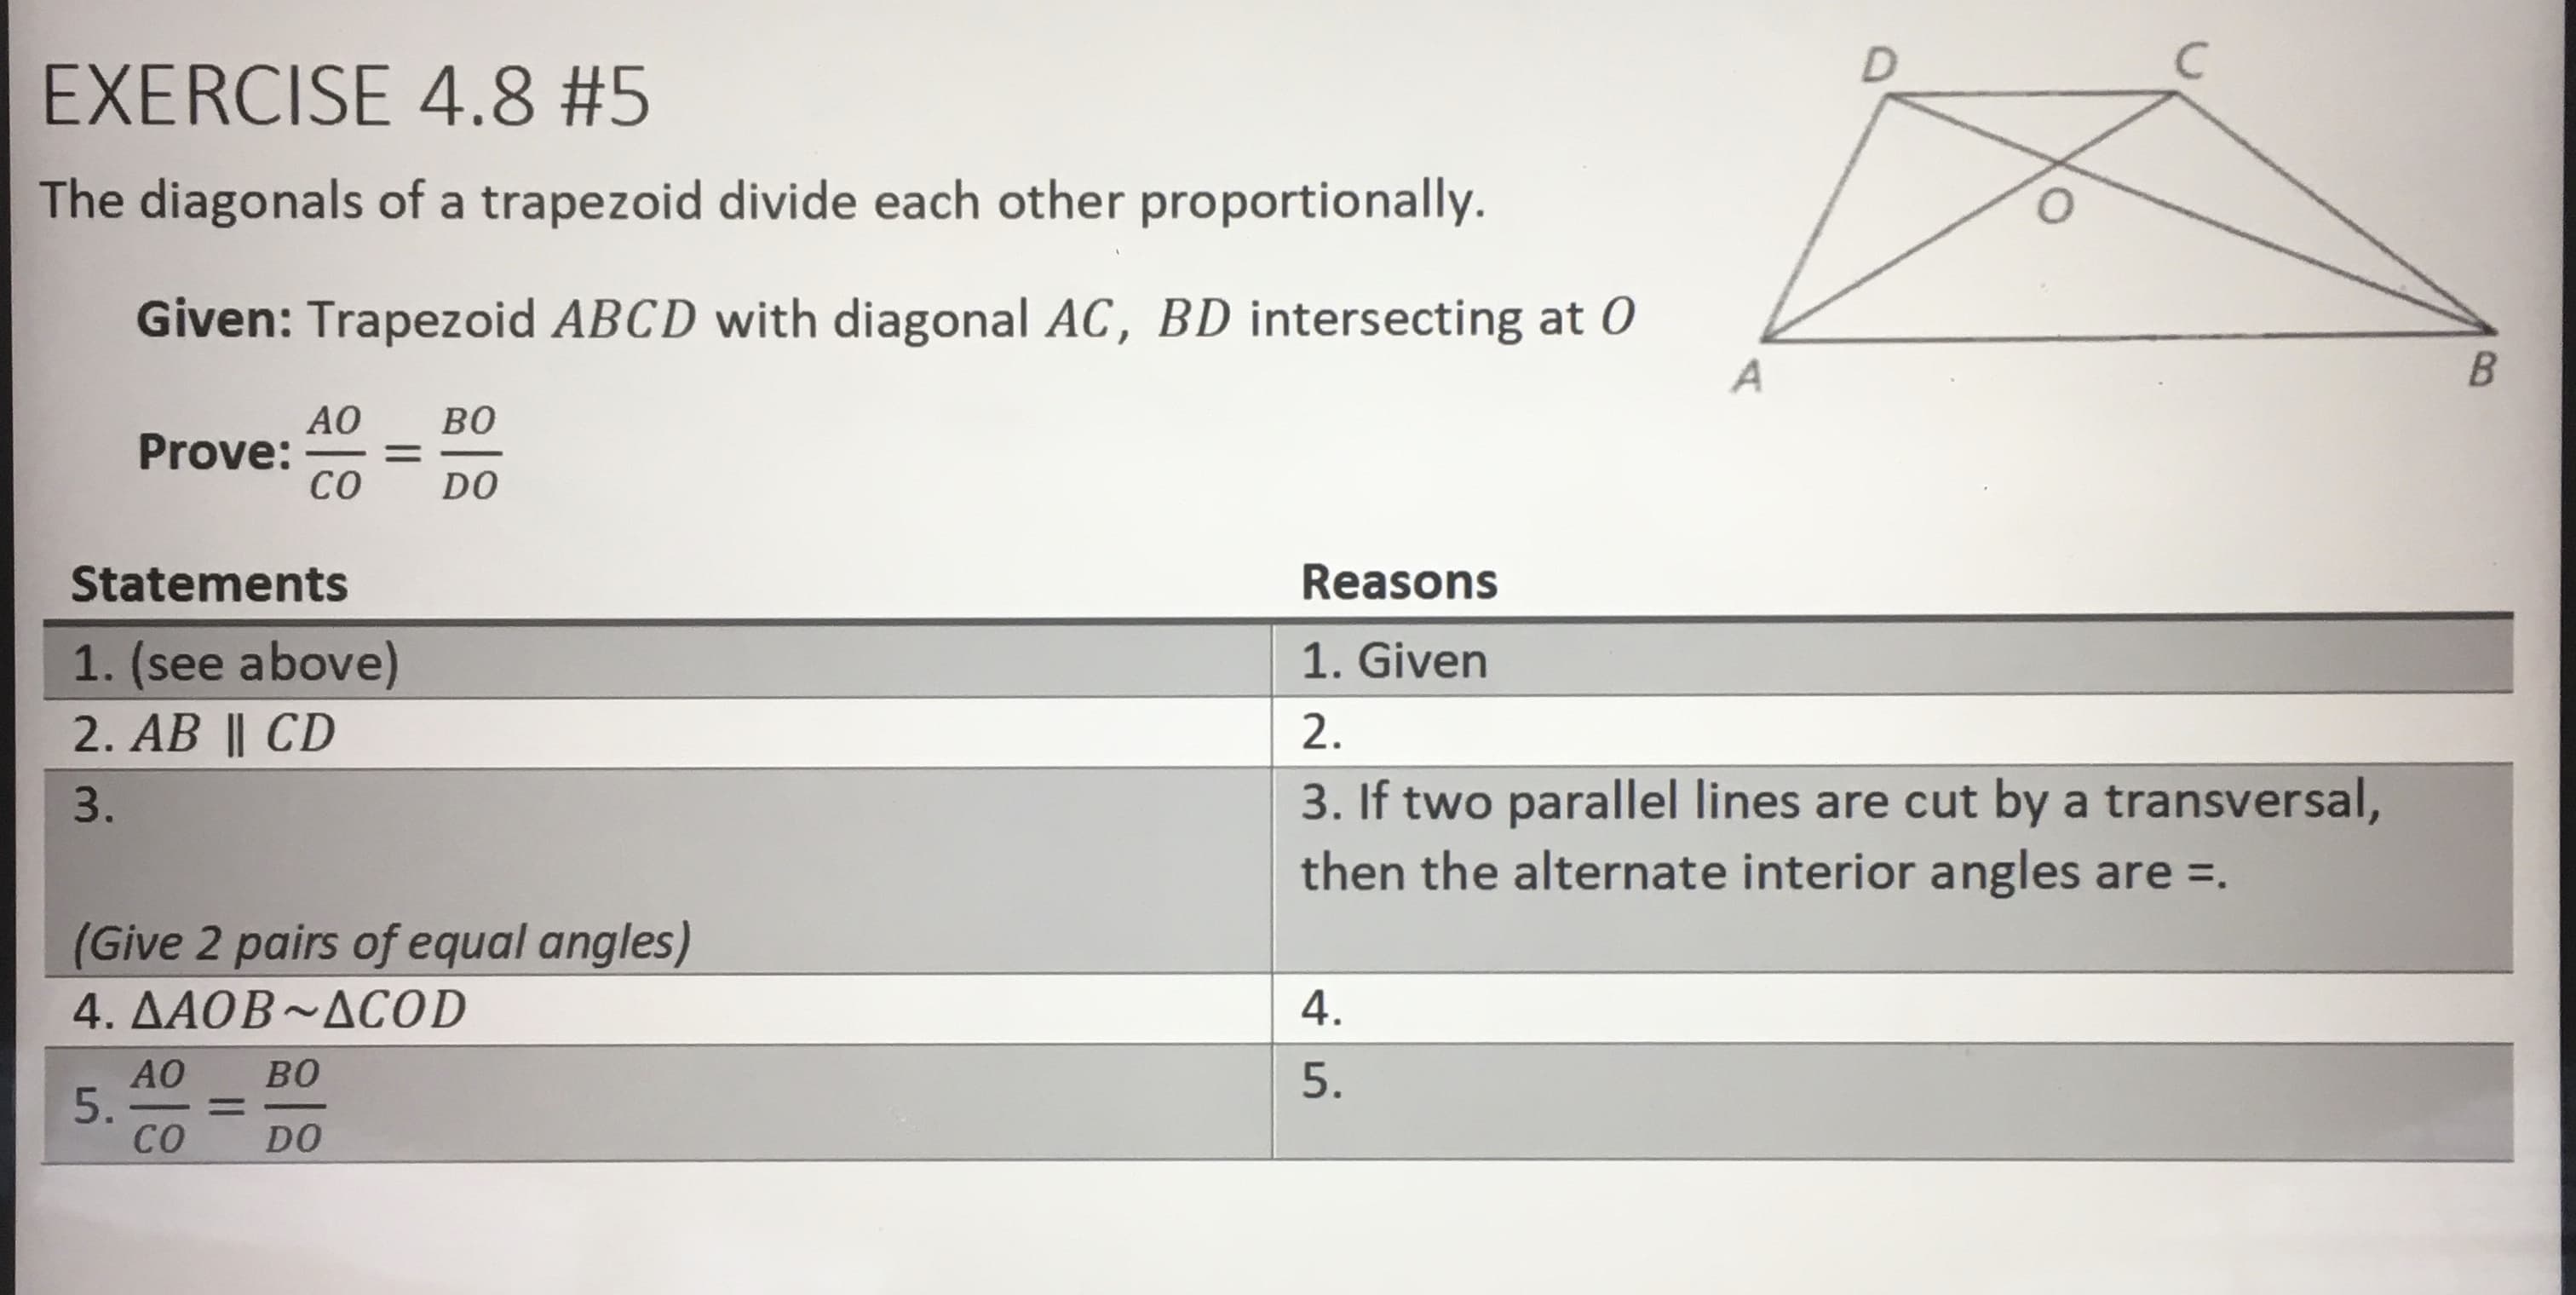 EXERCISE 4.8 #5
The diagonals of a trapezoid divide each other proportionally.
Given: Trapezoid ABCD with diagonal AC, BD intersecting at 0
AO
Prove:
CO
BO
DO
Statements
Reasons
1. (see above)
2. AB || CD
1. Given
2.
3. If two parallel lines are cut by a transversal,
then the alternate interior angles are =.
3.
(Give 2 pairs of equal angles)
4. AAOB~ACOD
4.
5.
5.
CO
%D
-
DO
B.
